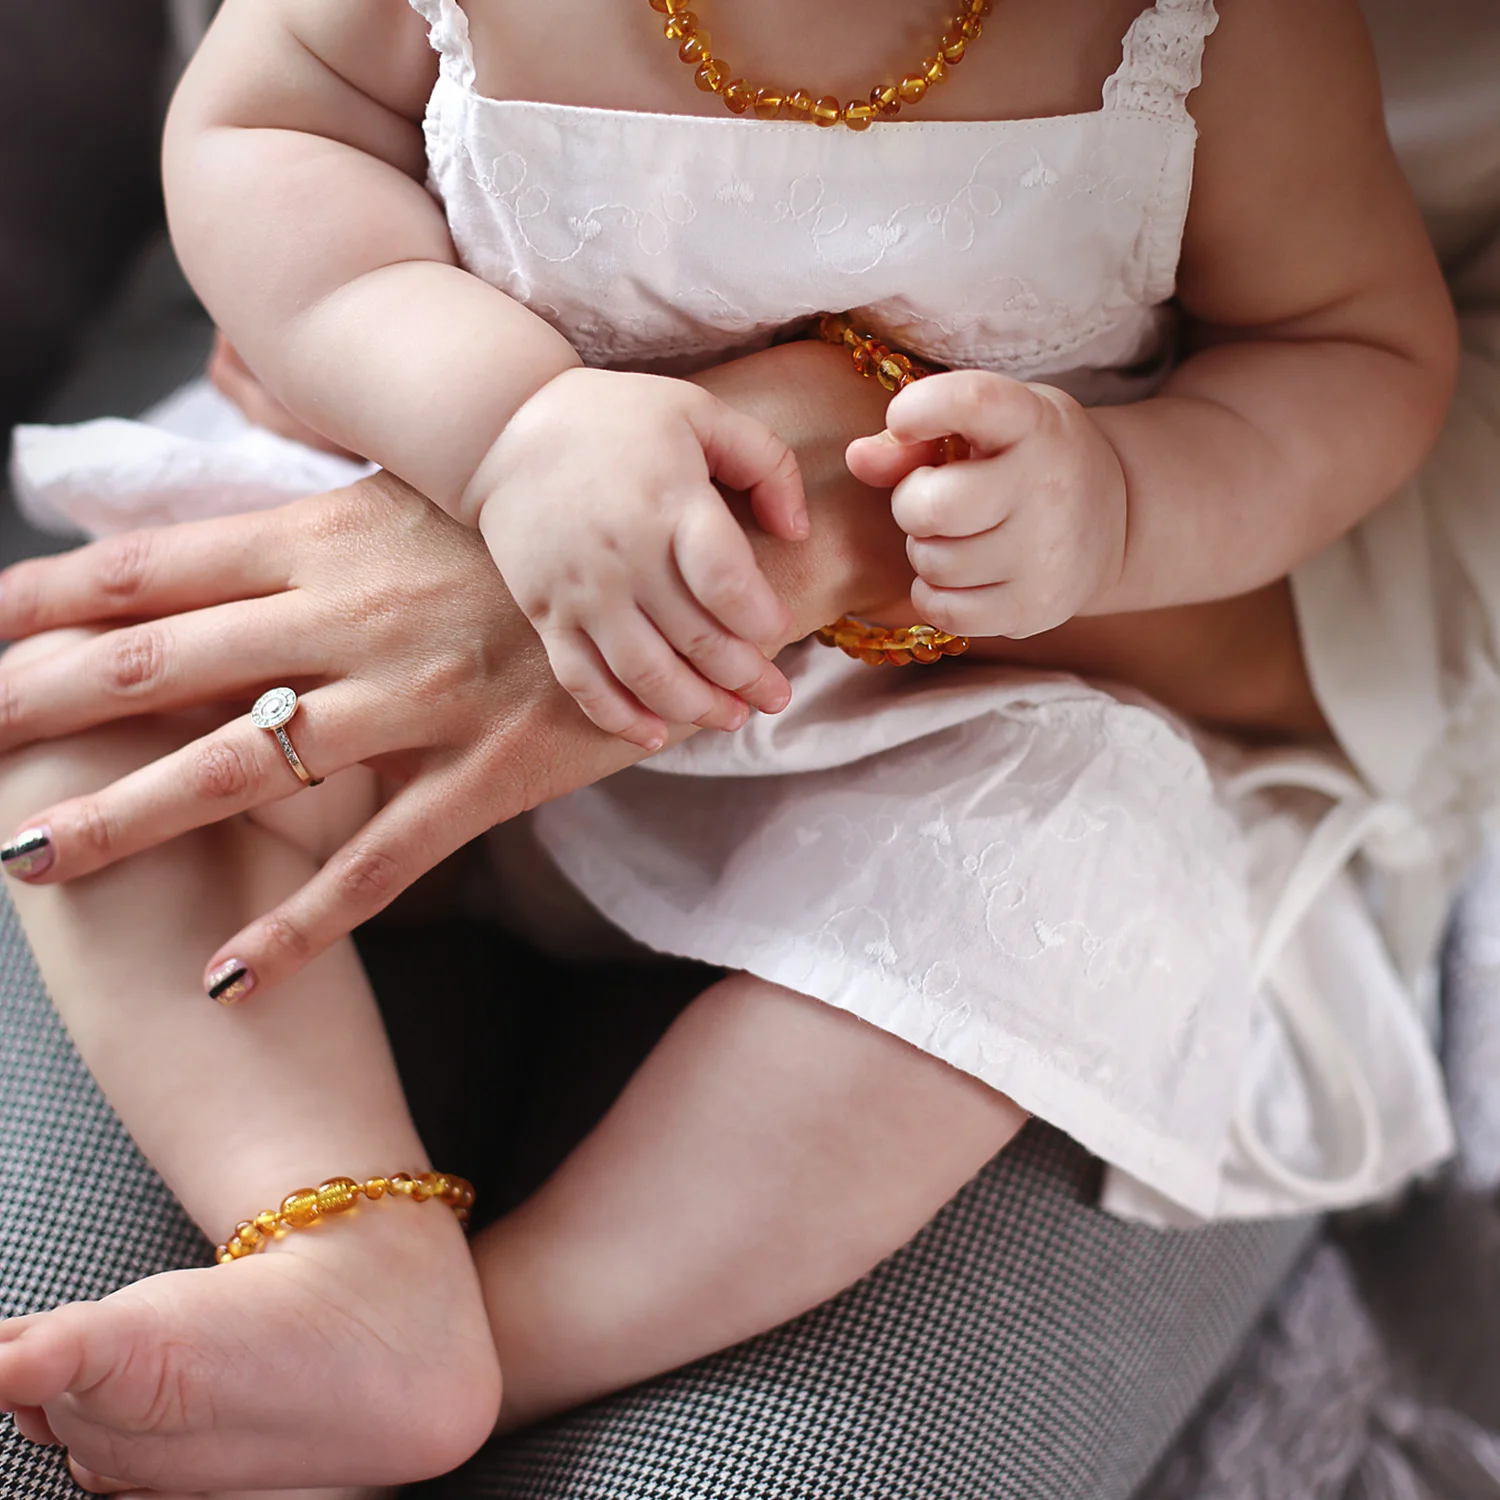 Benefits of Baltic amber necklaces for teething | Amber teething necklace, Amber  teething, Amber teething necklace benefits